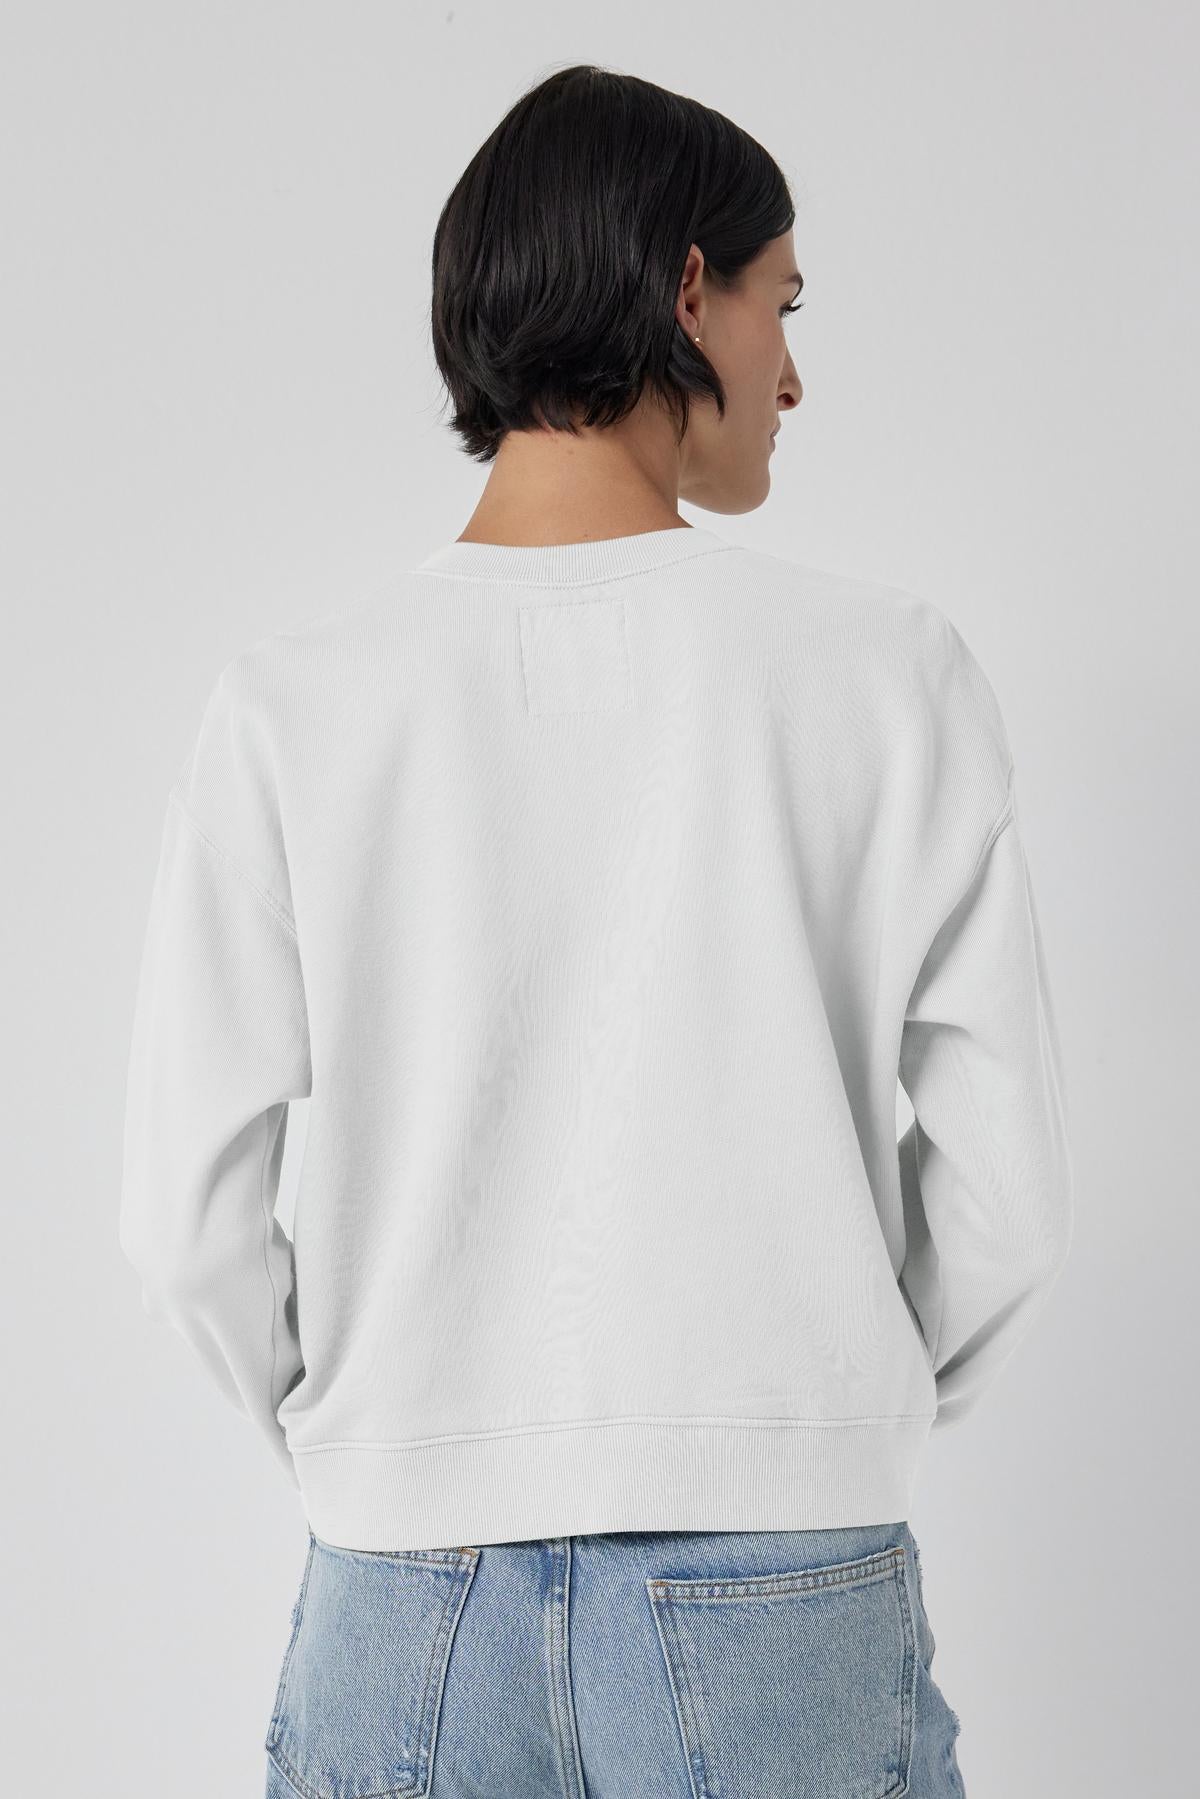 The back view of a woman wearing a white Velvet by Jenny Graham YNEZ SWEATSHIRT and jeans.-35678682218689